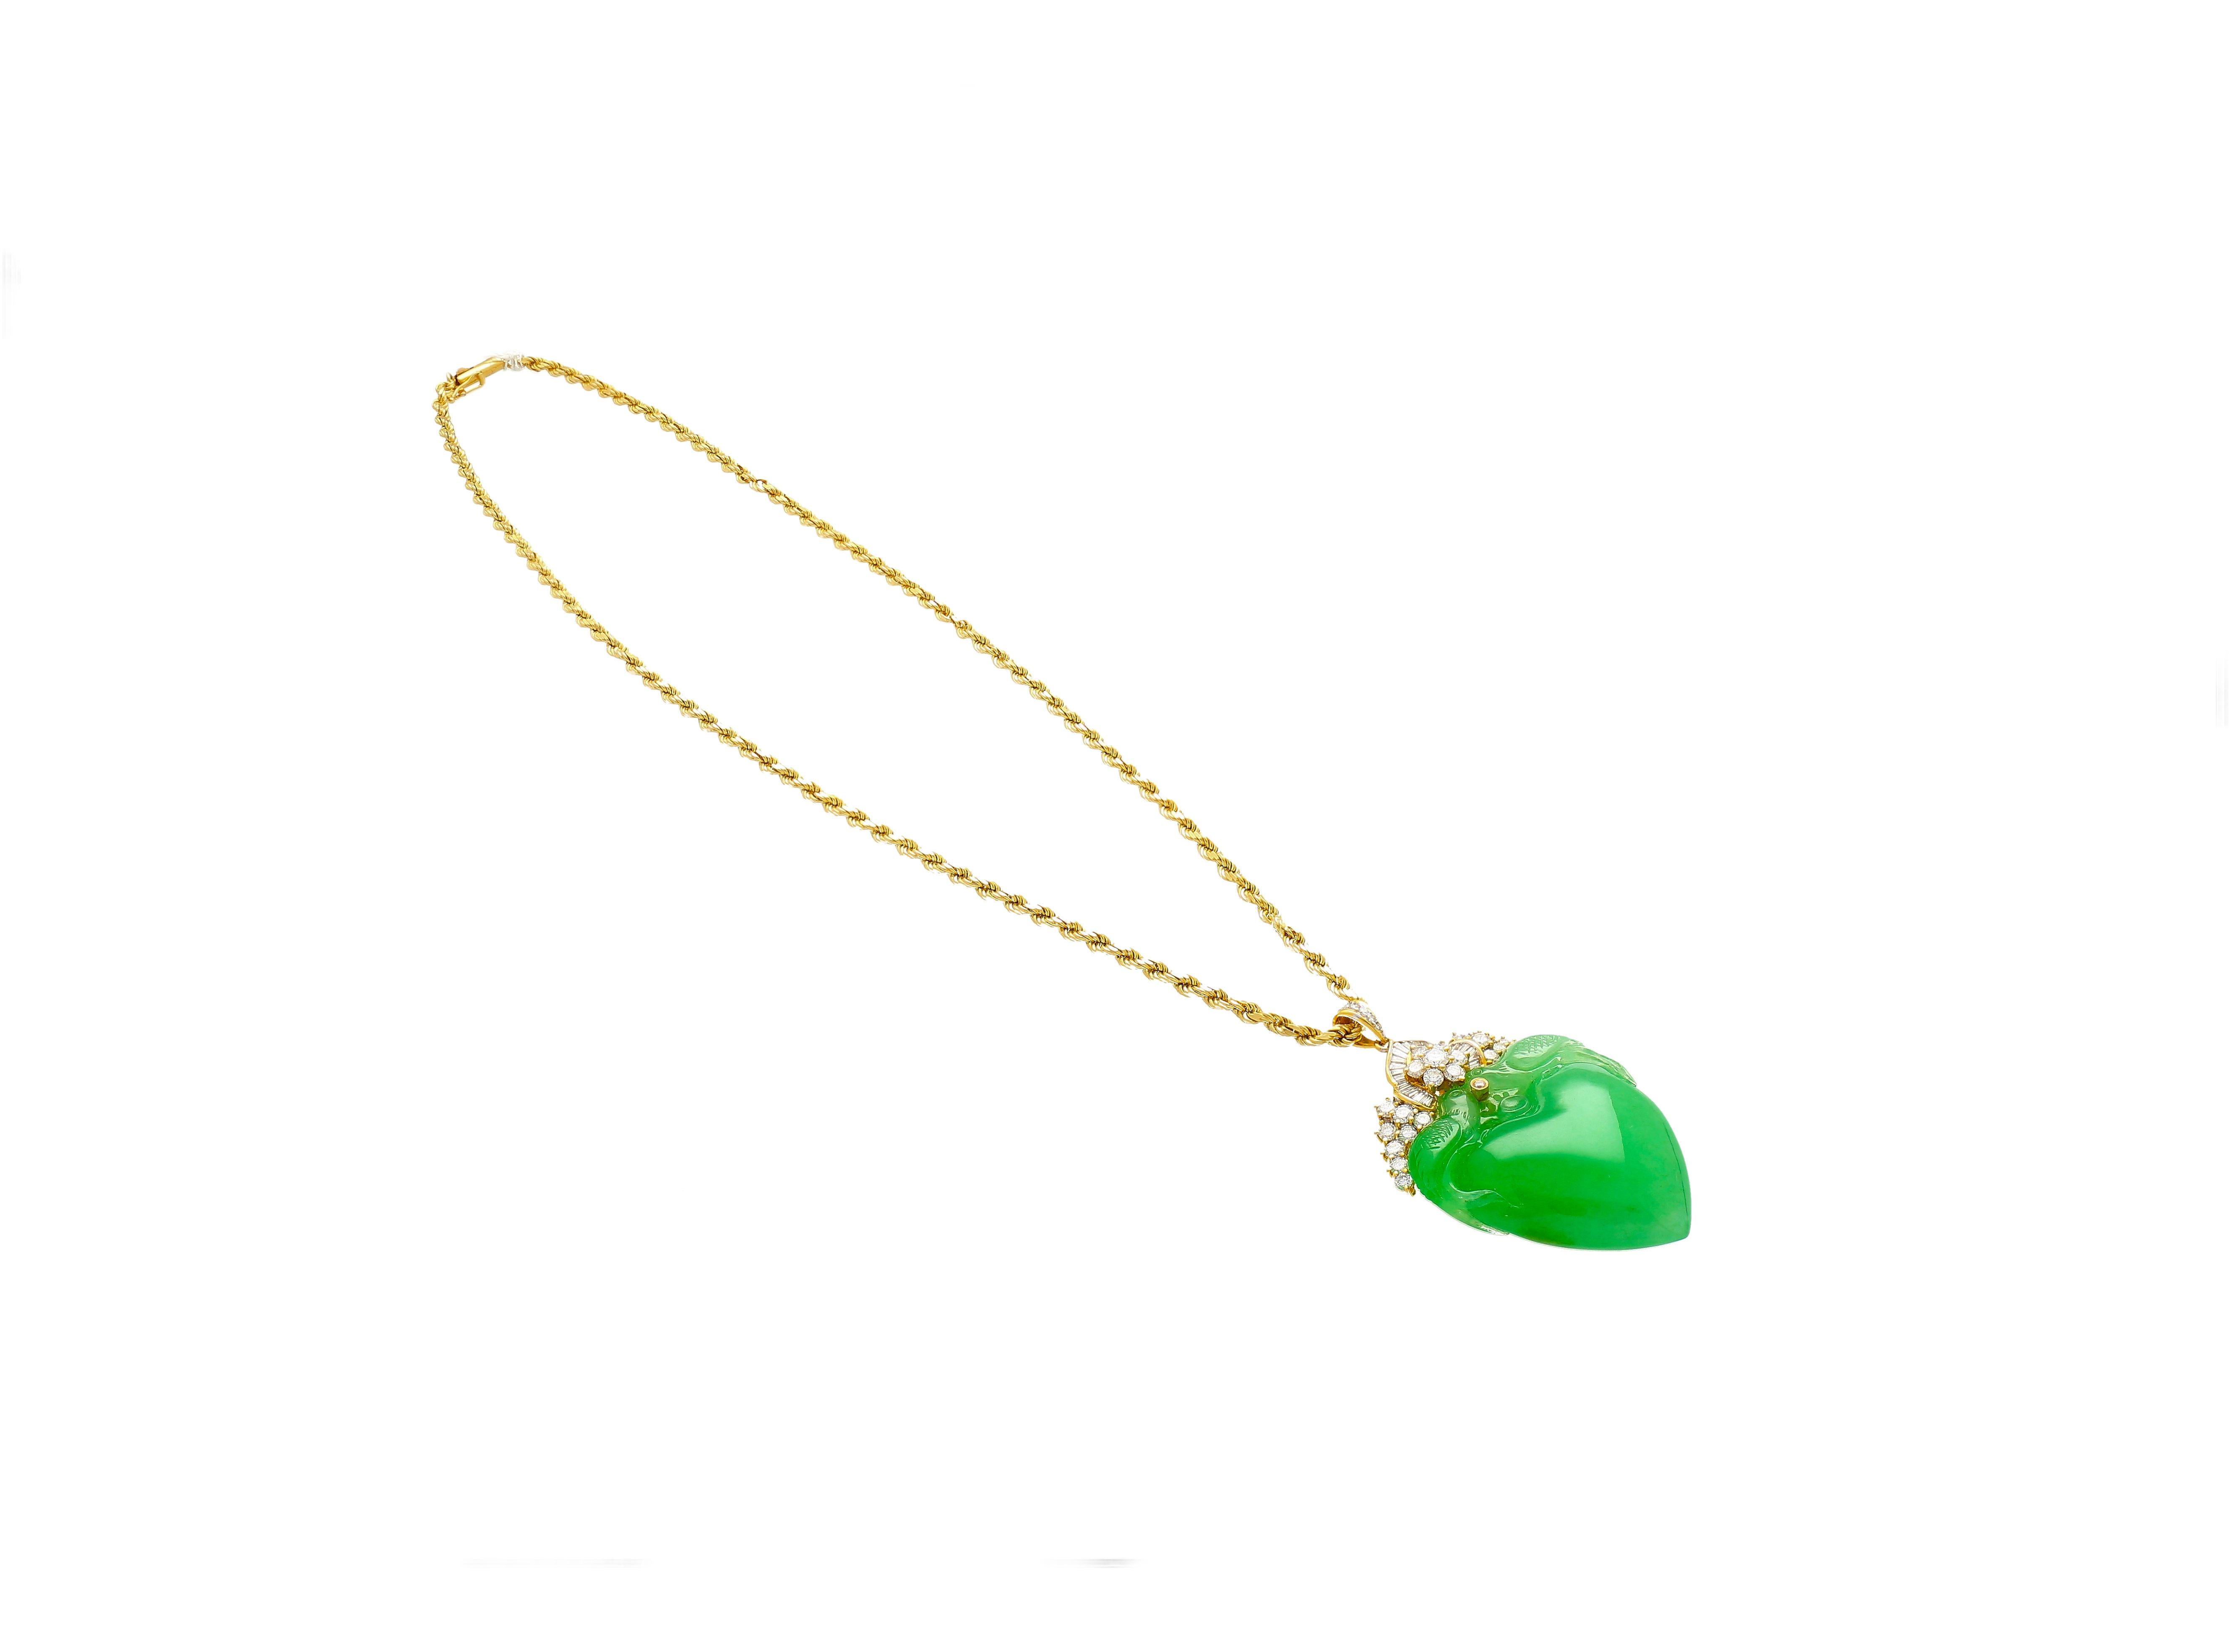 Carved Heart Jadeite Jade Bird Feeding Motif Pendant Necklace in 18k Gold  In New Condition For Sale In Miami, FL